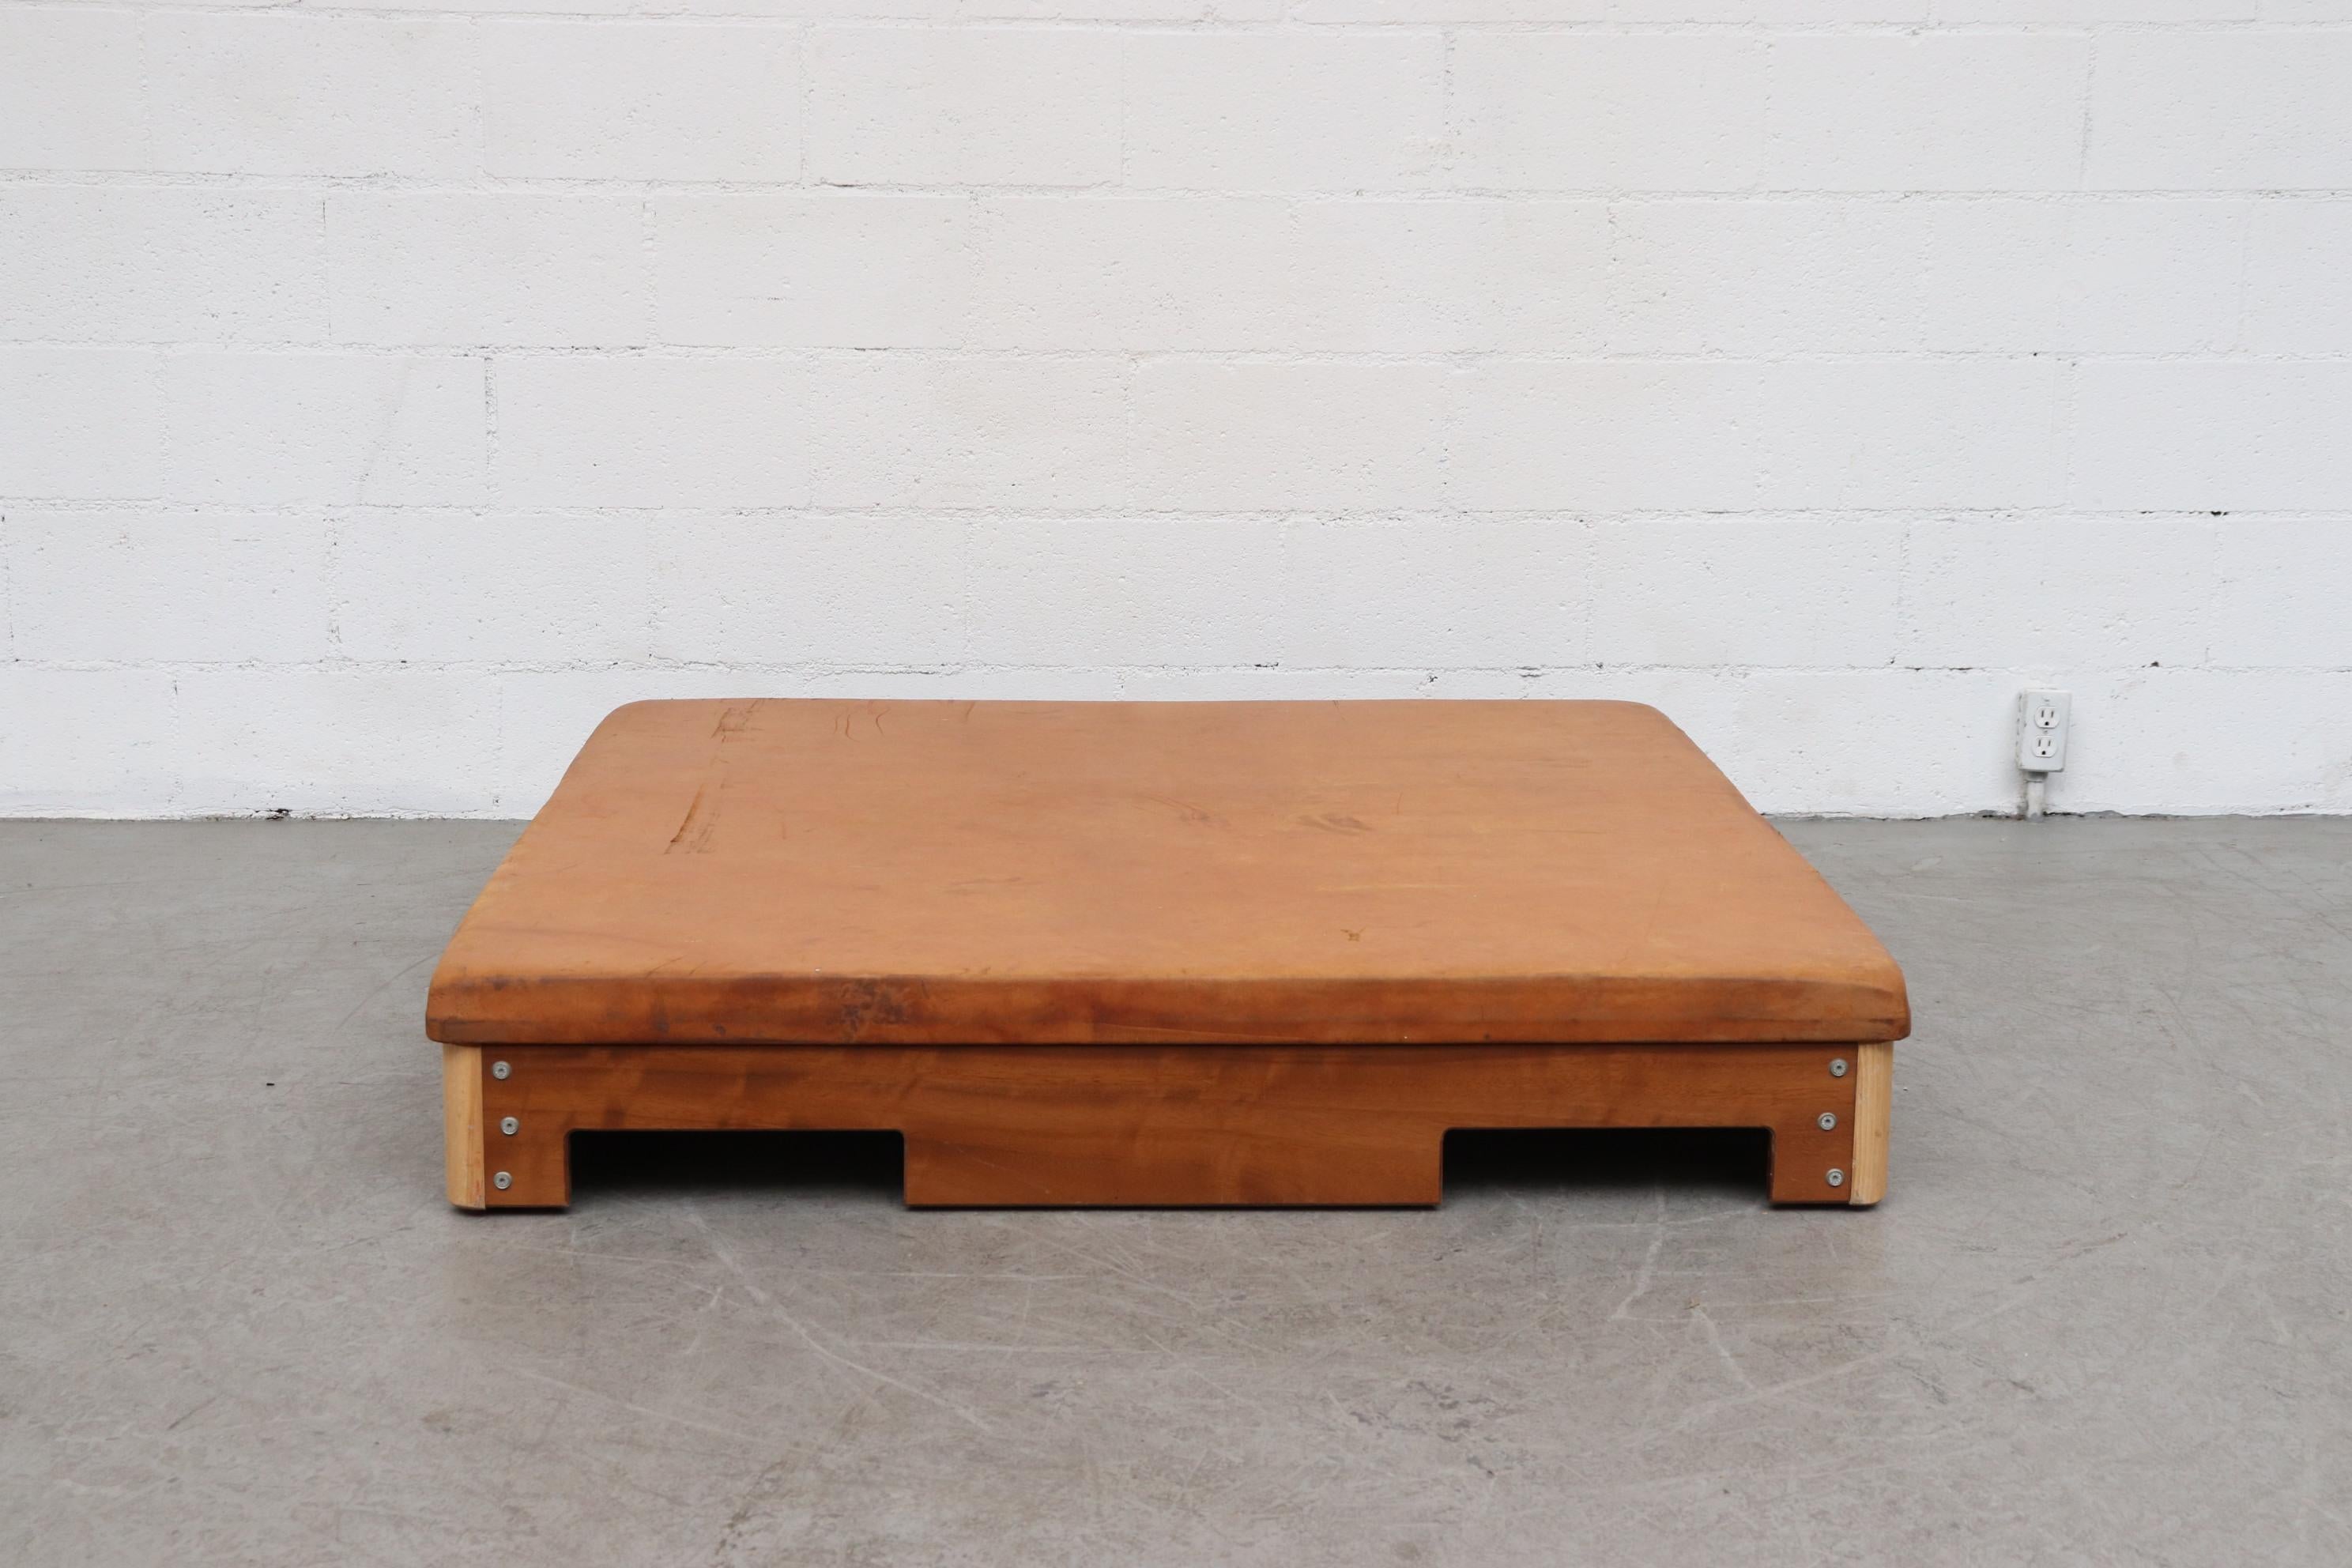 Square natural leather gym mat with heavy wooden frame. Perfect for a Zen lounge room, soft coffee table or twin sized headboard. In original condition with visible wear, some staining and nice patina. Well loved.